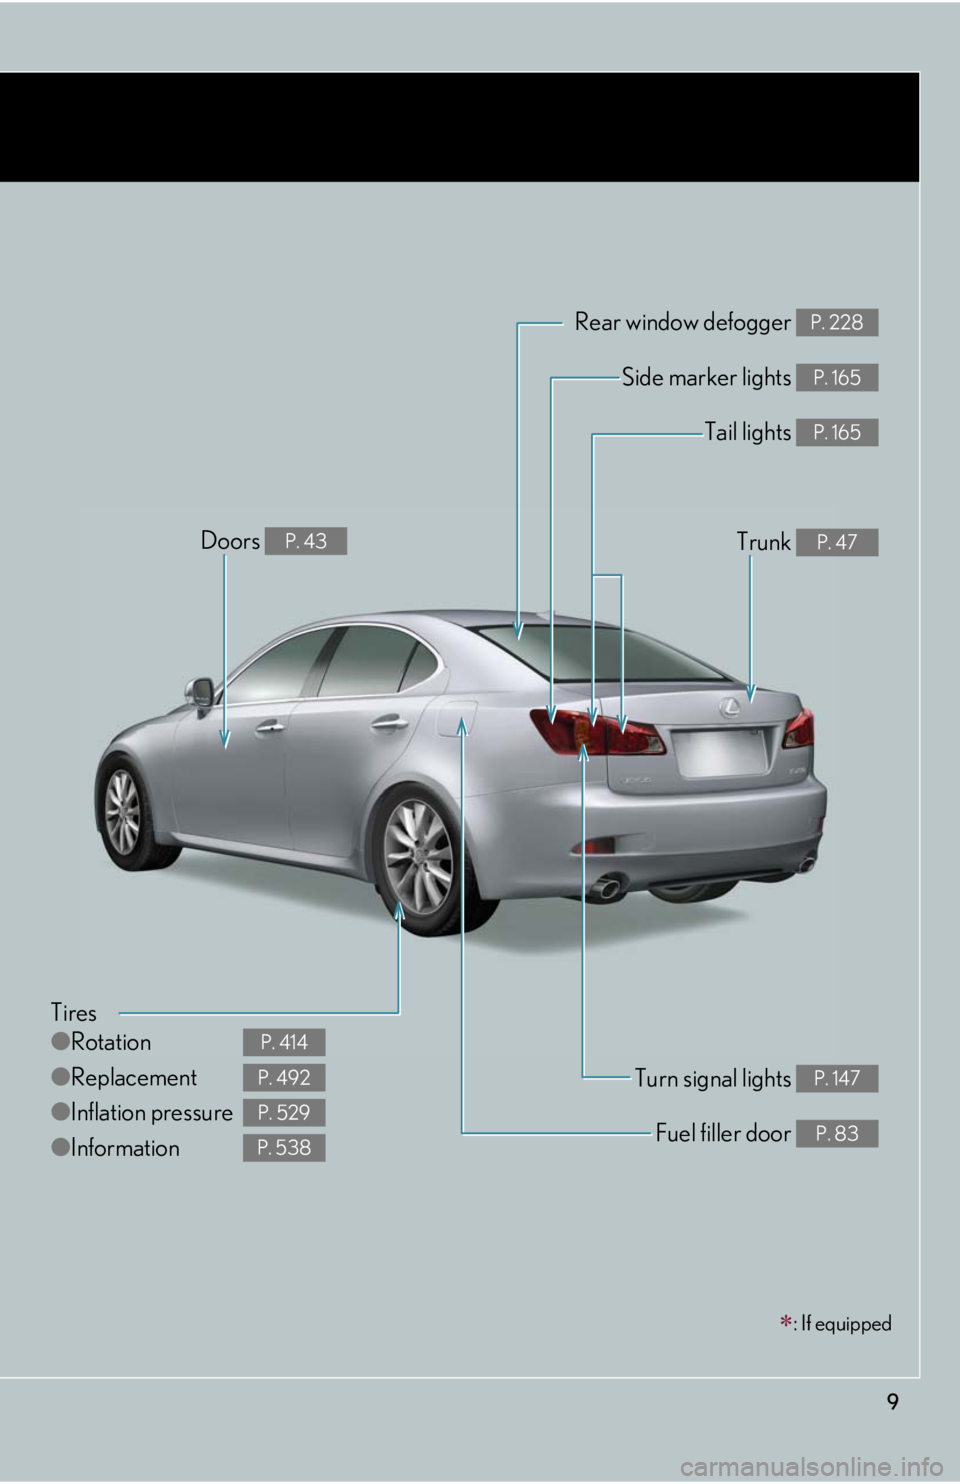 Lexus IS250 2010  Using The Audio System / LEXUS 2010 IS350 IS250 OWNERS MANUAL (OM53A23U) 9
: If equipped
Tires
●Rotation
●Replacement
●Inflation pressure
●Information
P. 414
P. 492
P. 529
P. 538
Tail lights P. 165
Side marker lights P. 165
Trunk P. 47
Rear window defogger P. 22